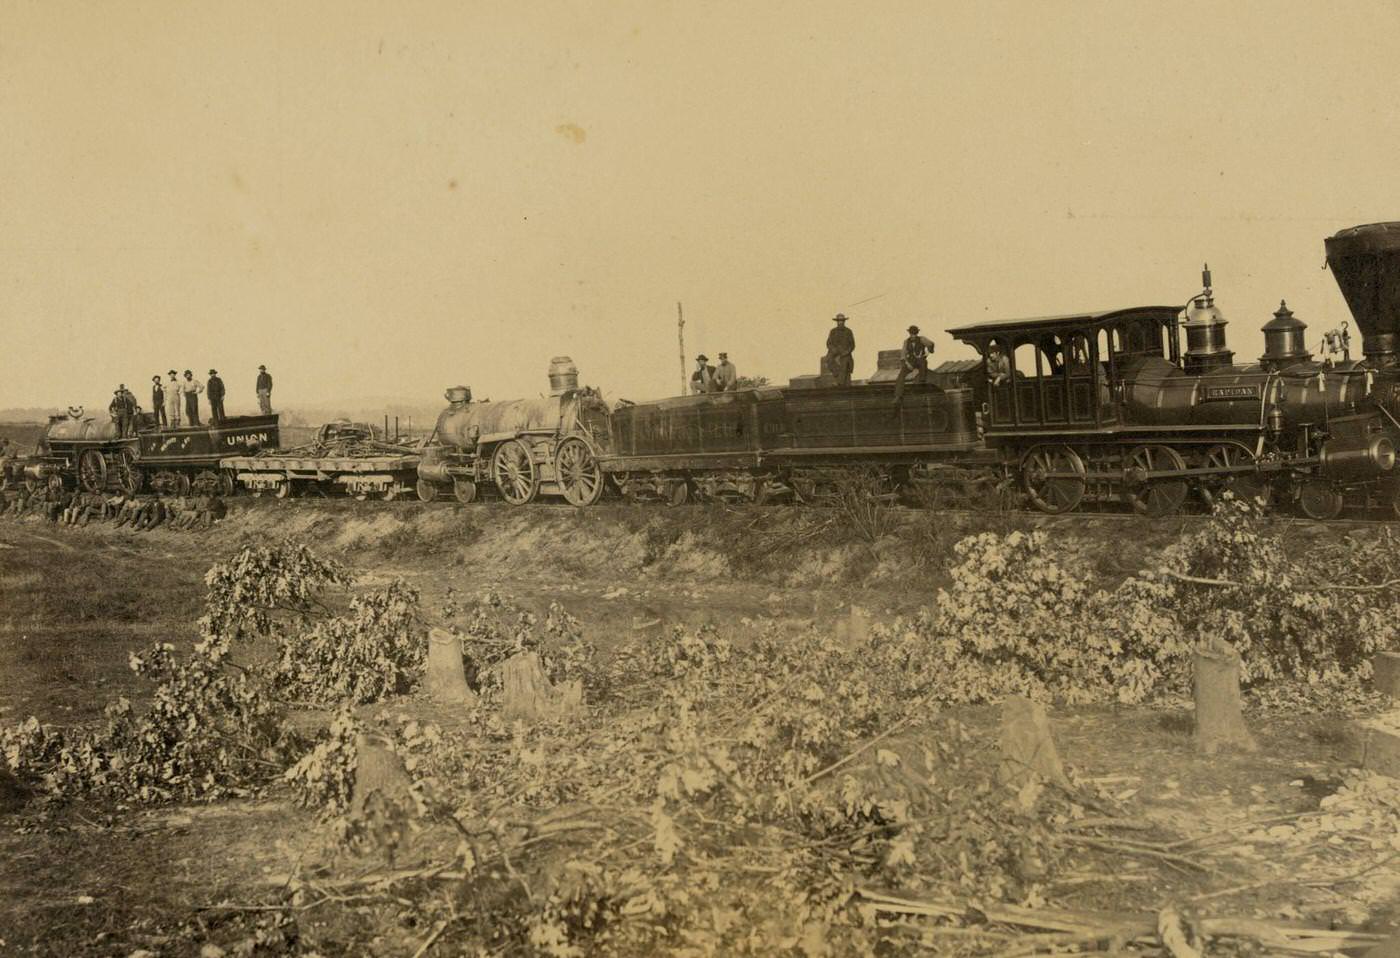 Wreck on the track, ready for transportation to Alexandria, 1863